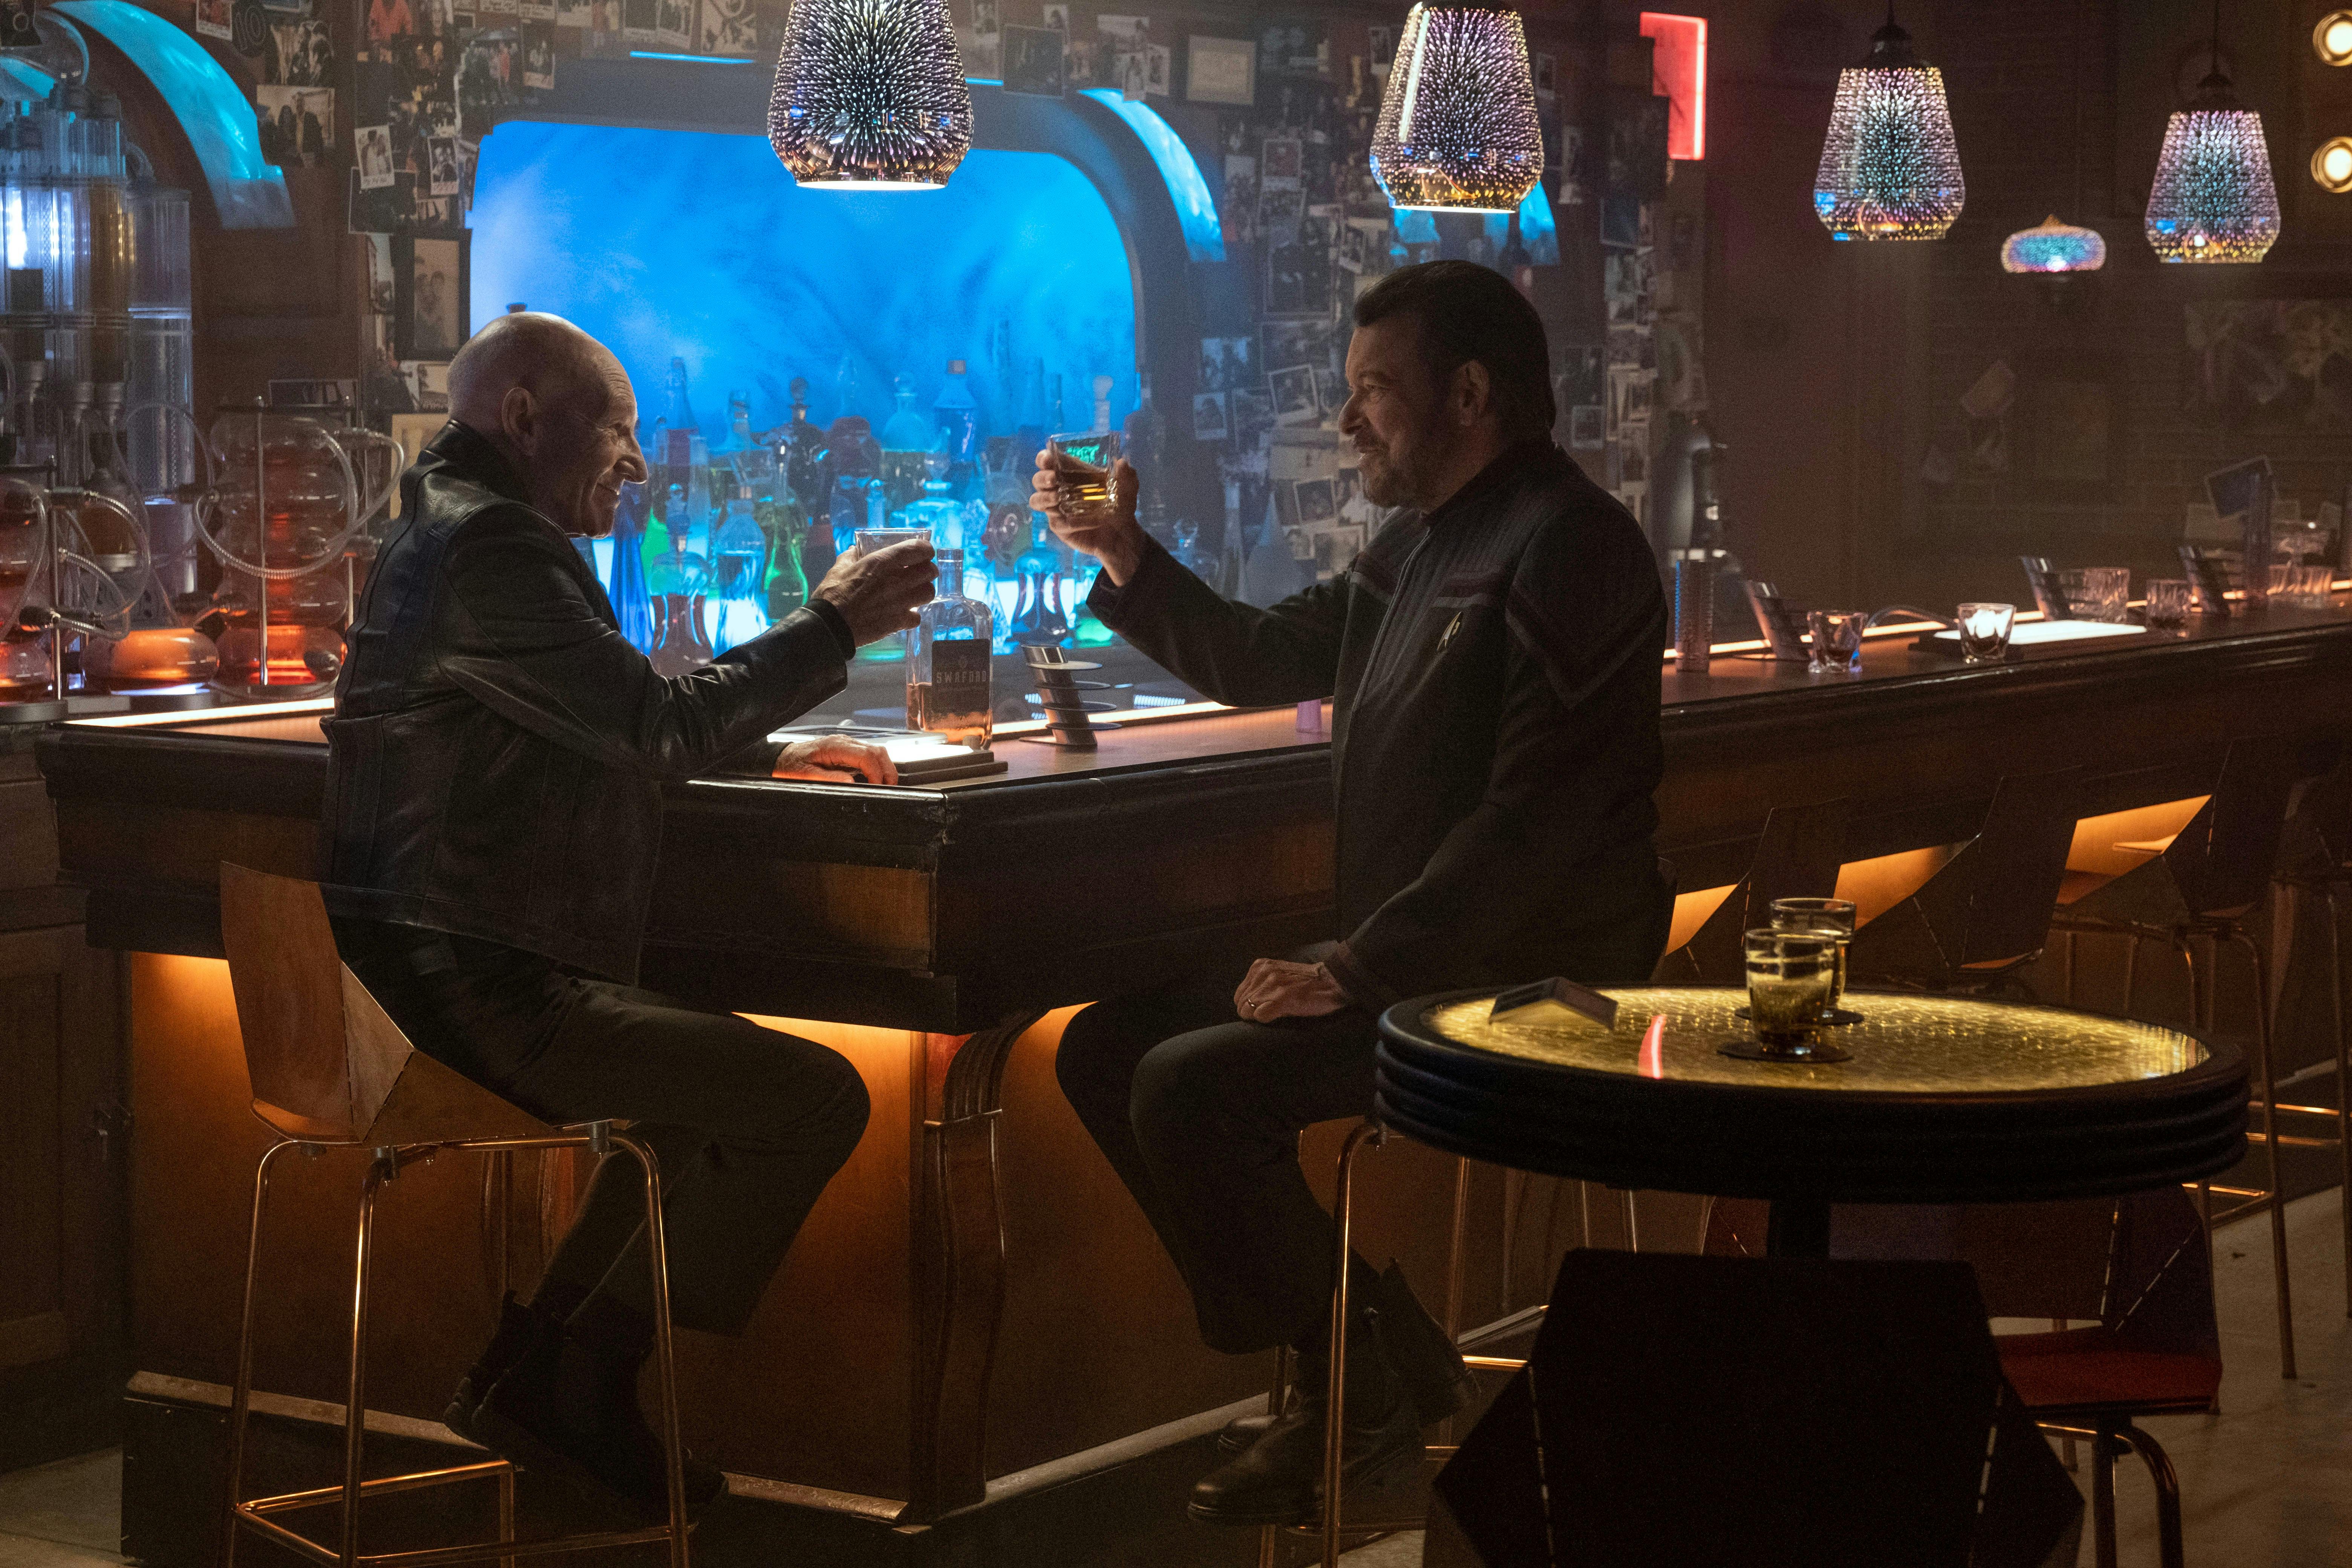 Picard and Riker raise their glasses in celebration in a flashback at 10 Forward